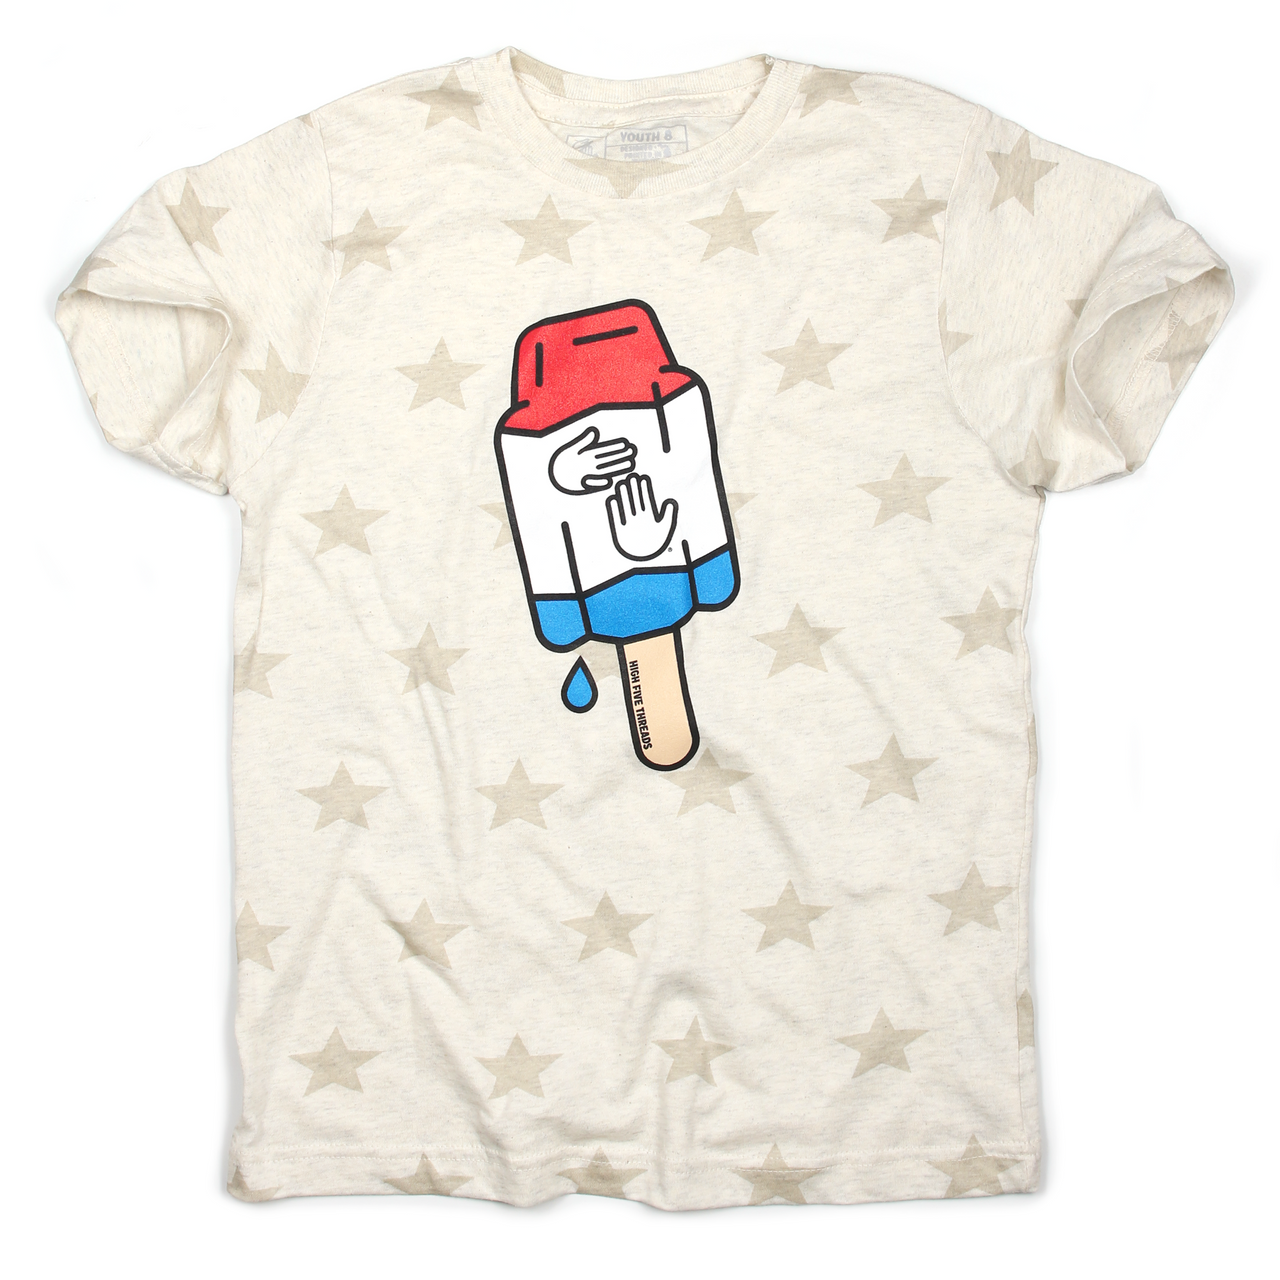 'Merica Popsicle Tee (Youth)